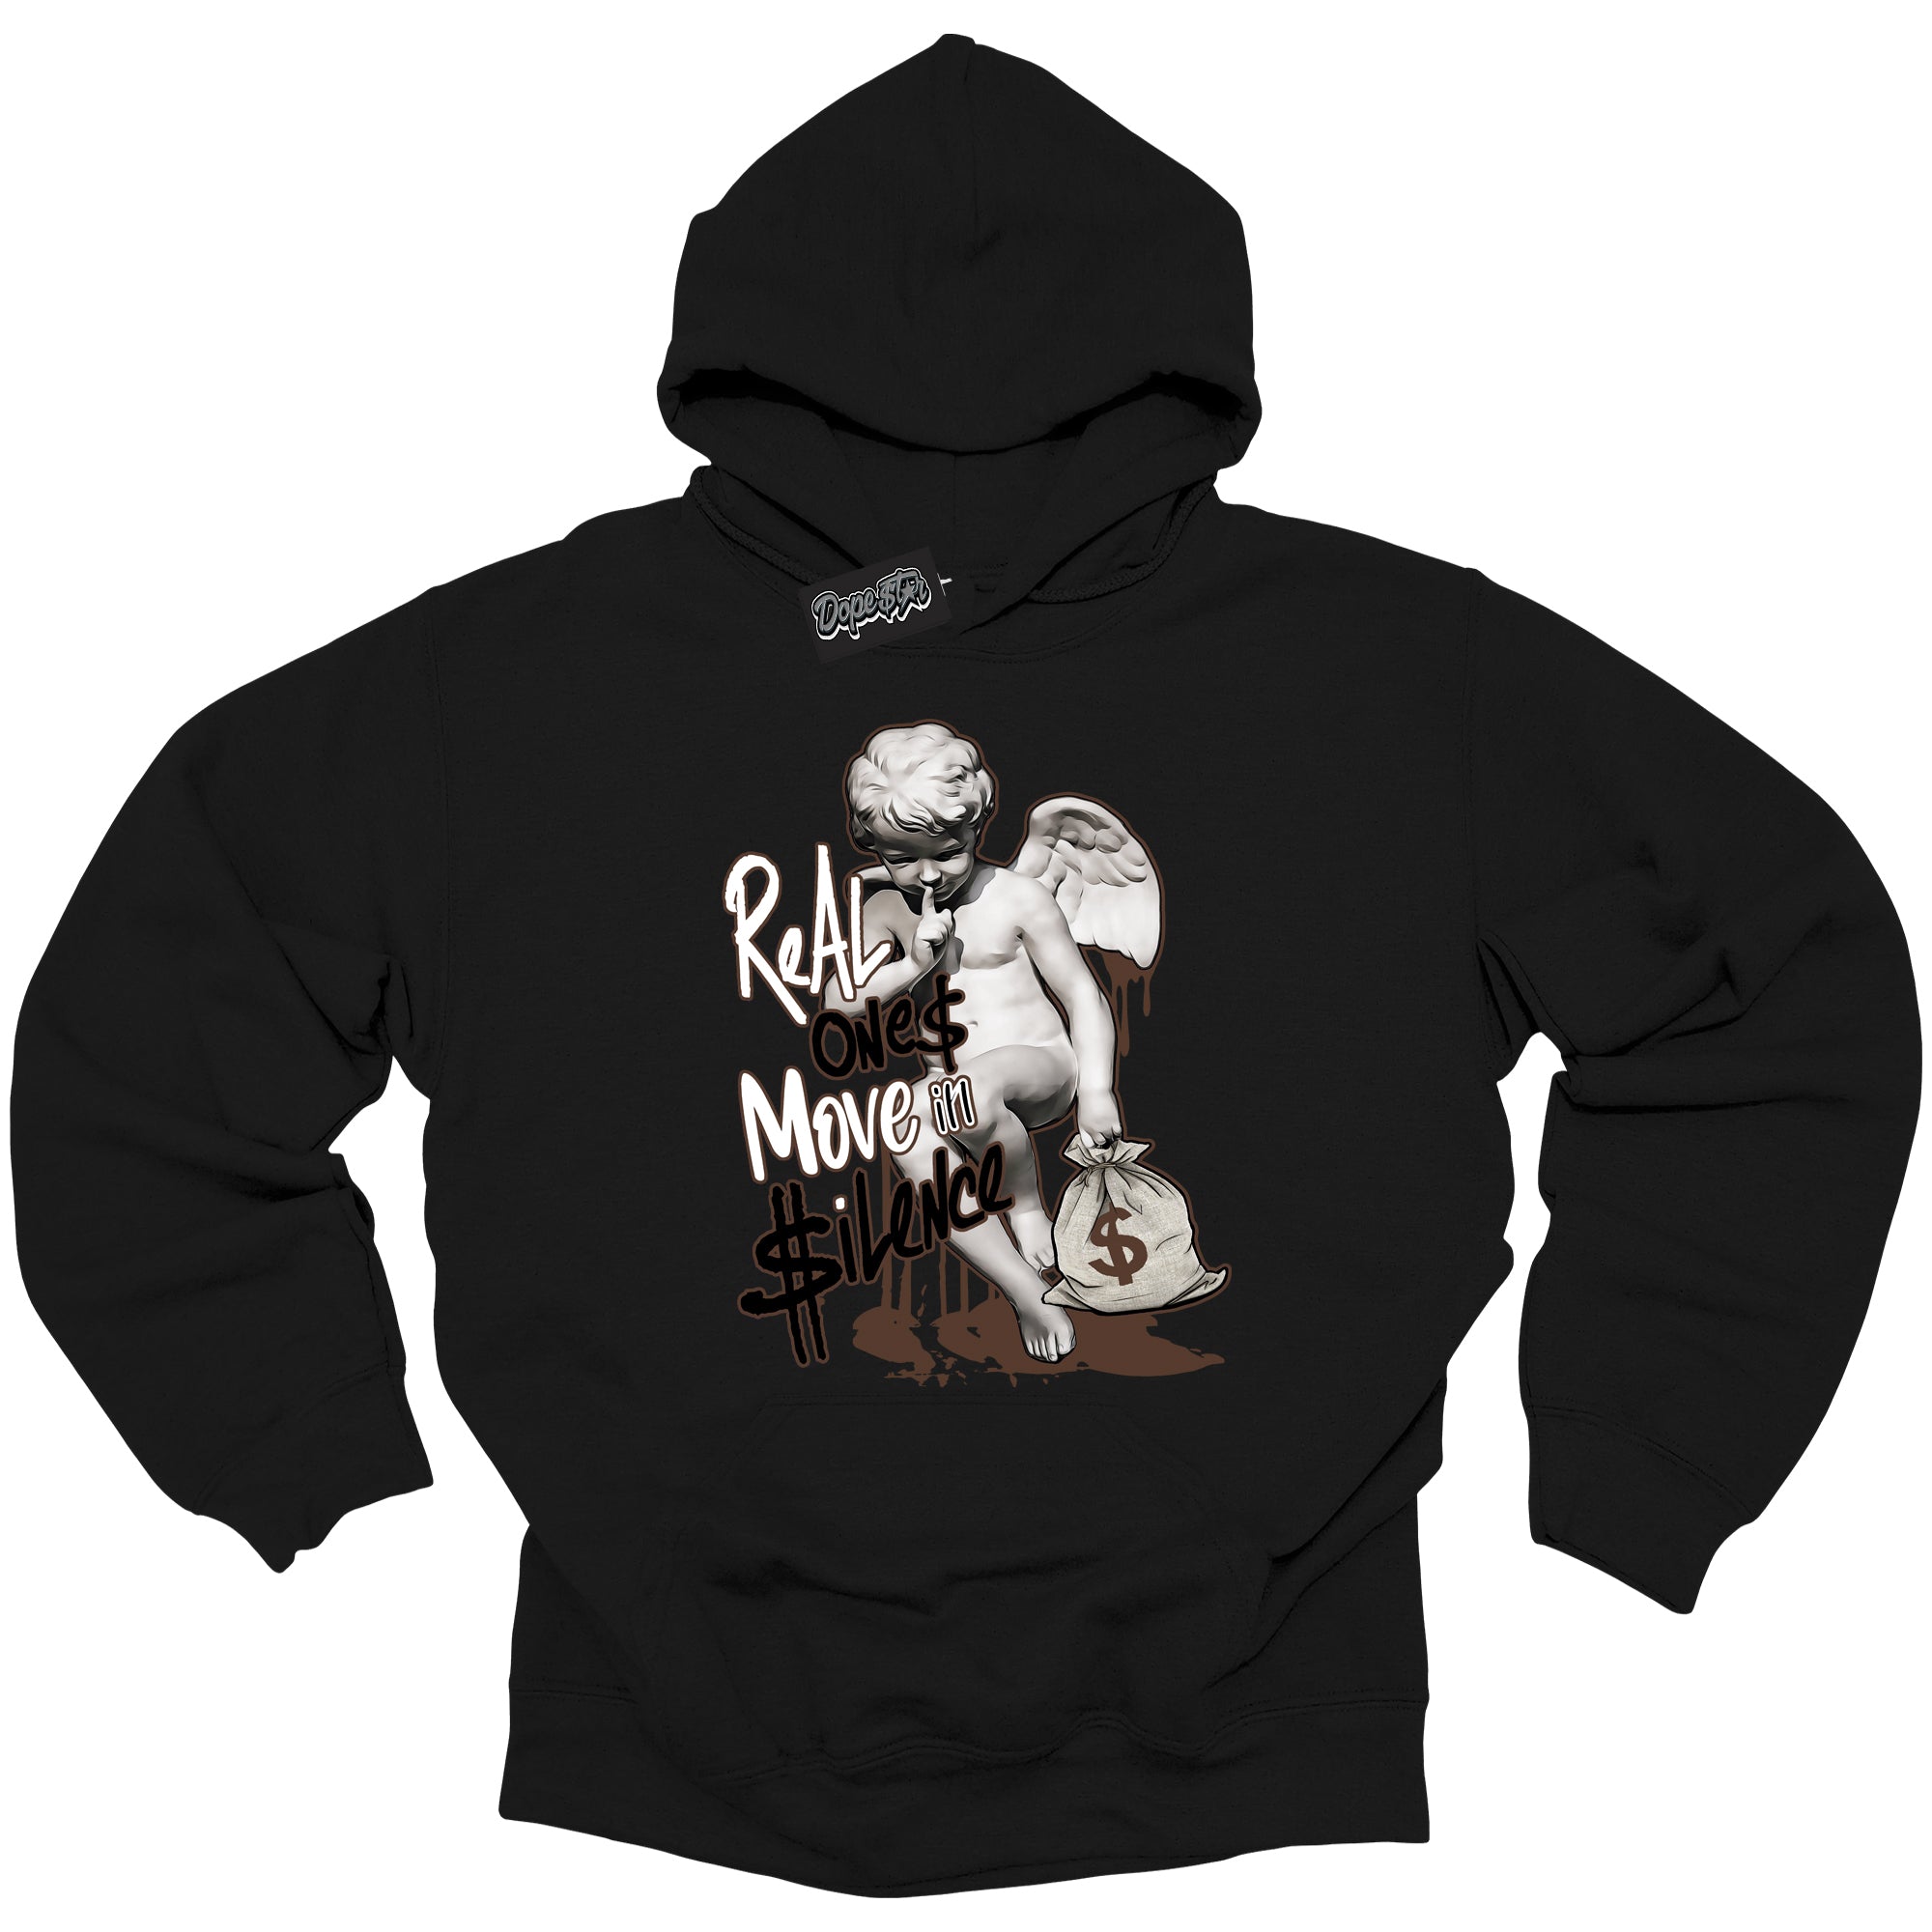 Cool Black Graphic DopeStar Hoodie with “ Real Ones Cherub “ print, that perfectly matches Palomino 1s sneakers